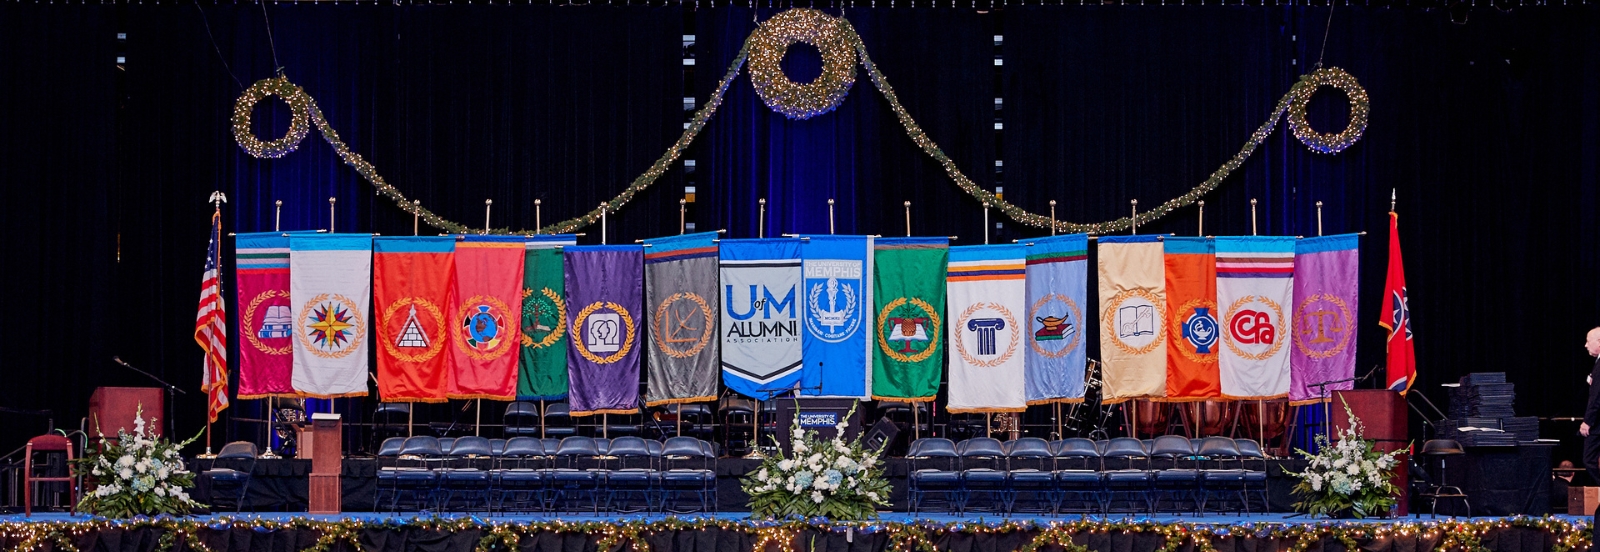 colleges banners